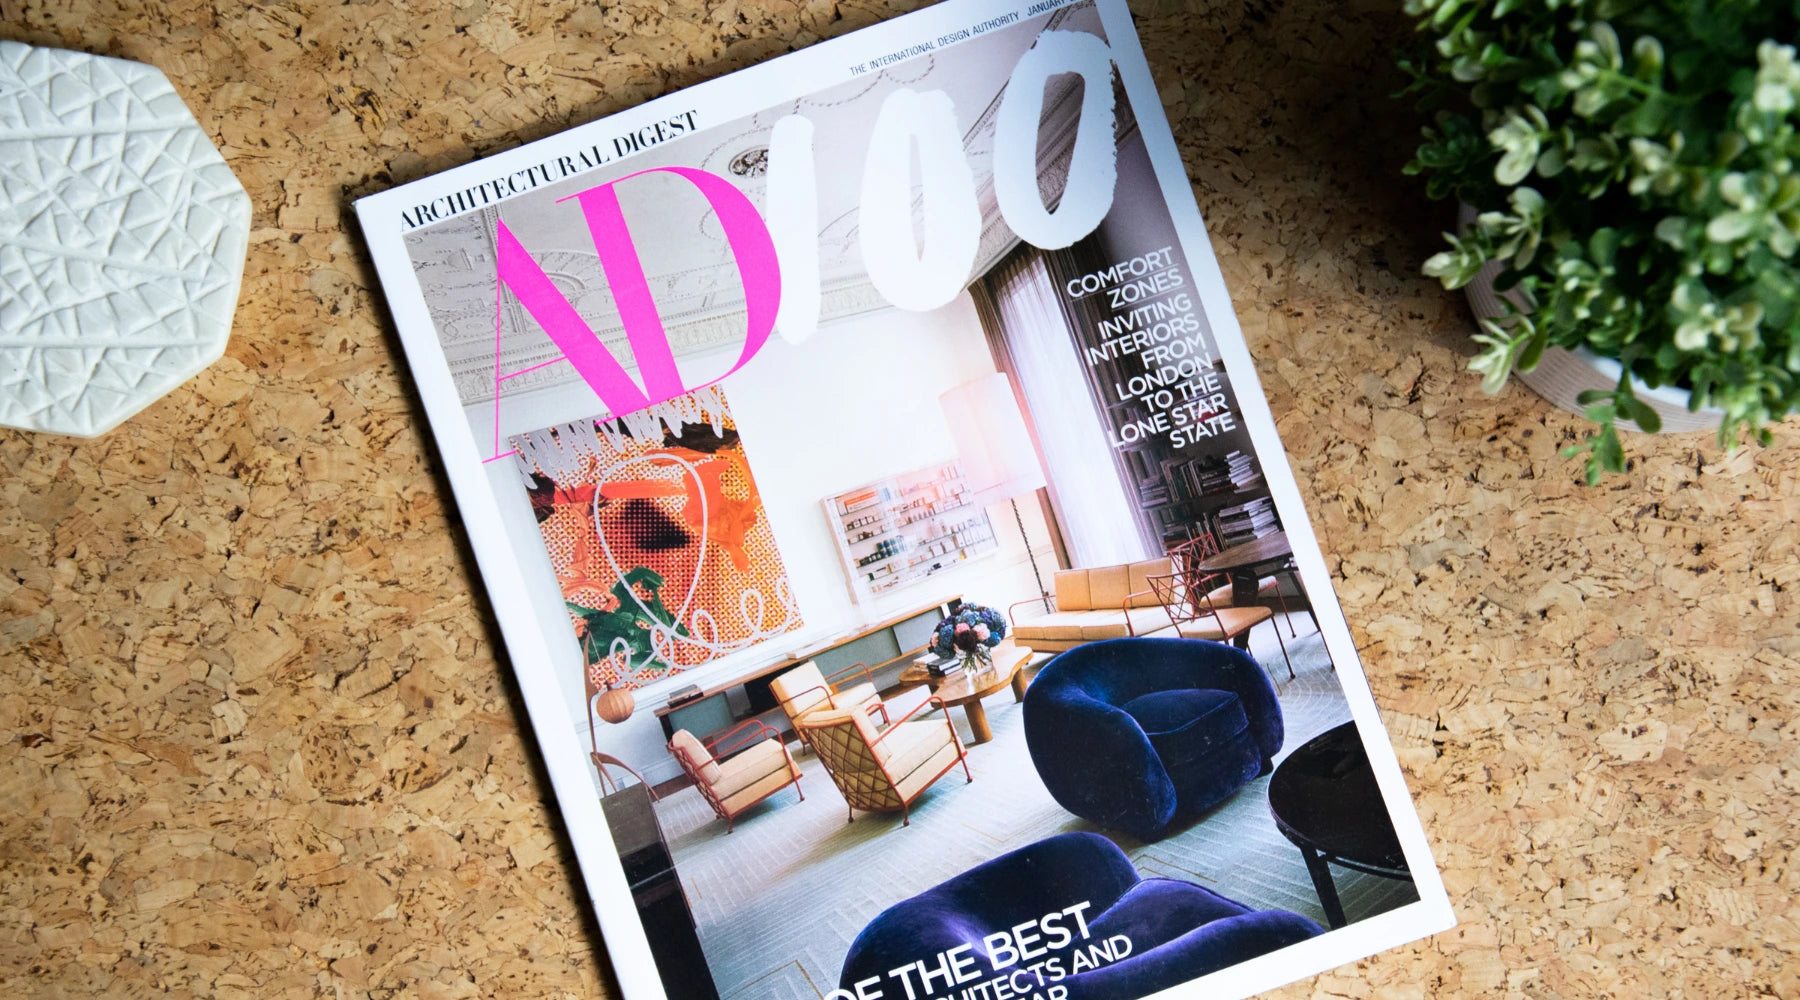 Architectural digest magazine on a wood table